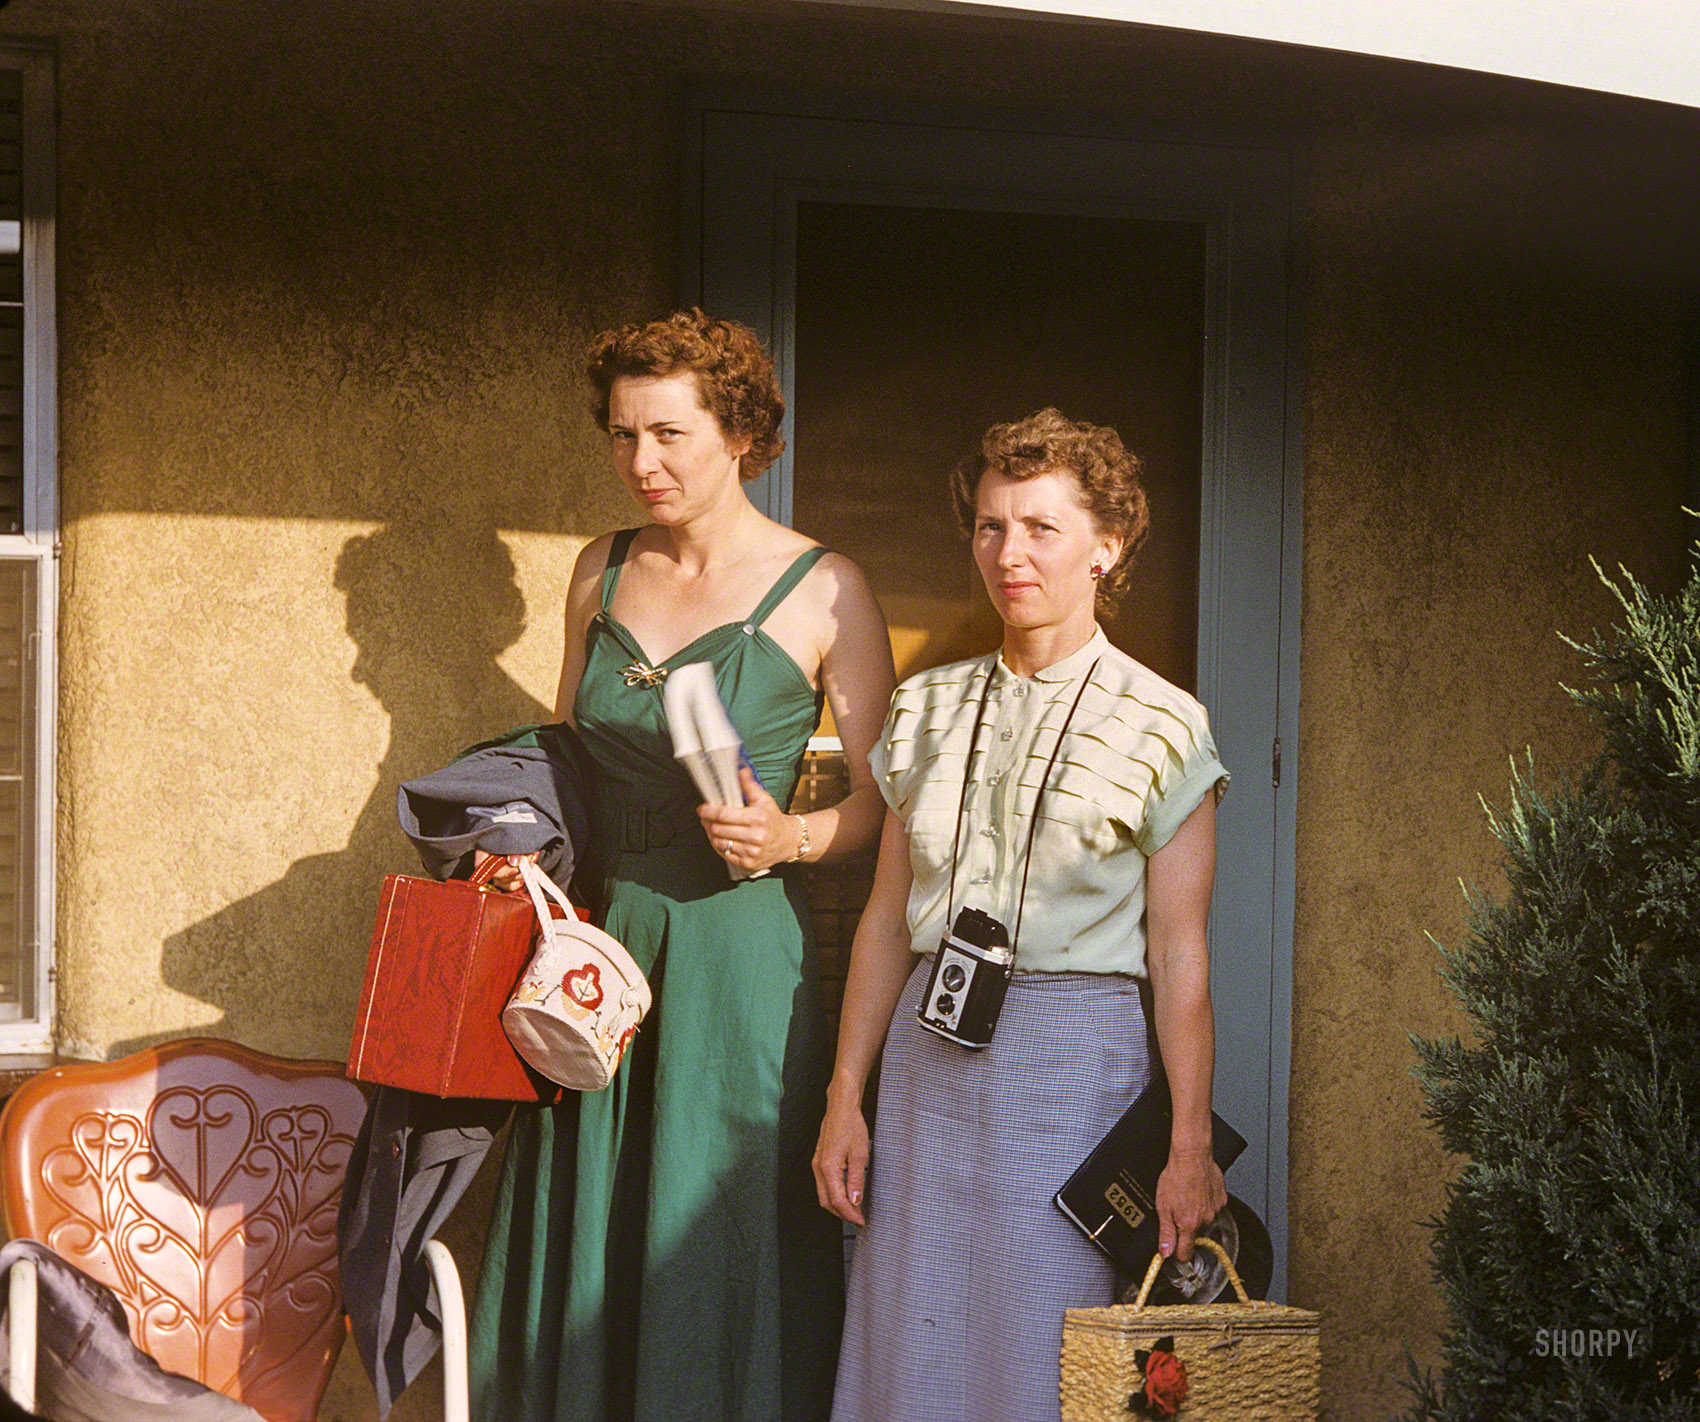 An unlabeled slide from the Linda series of Kodachromes. It seems to be 1952, and there are evidently sights to be seen. Commence tourism! View full size.